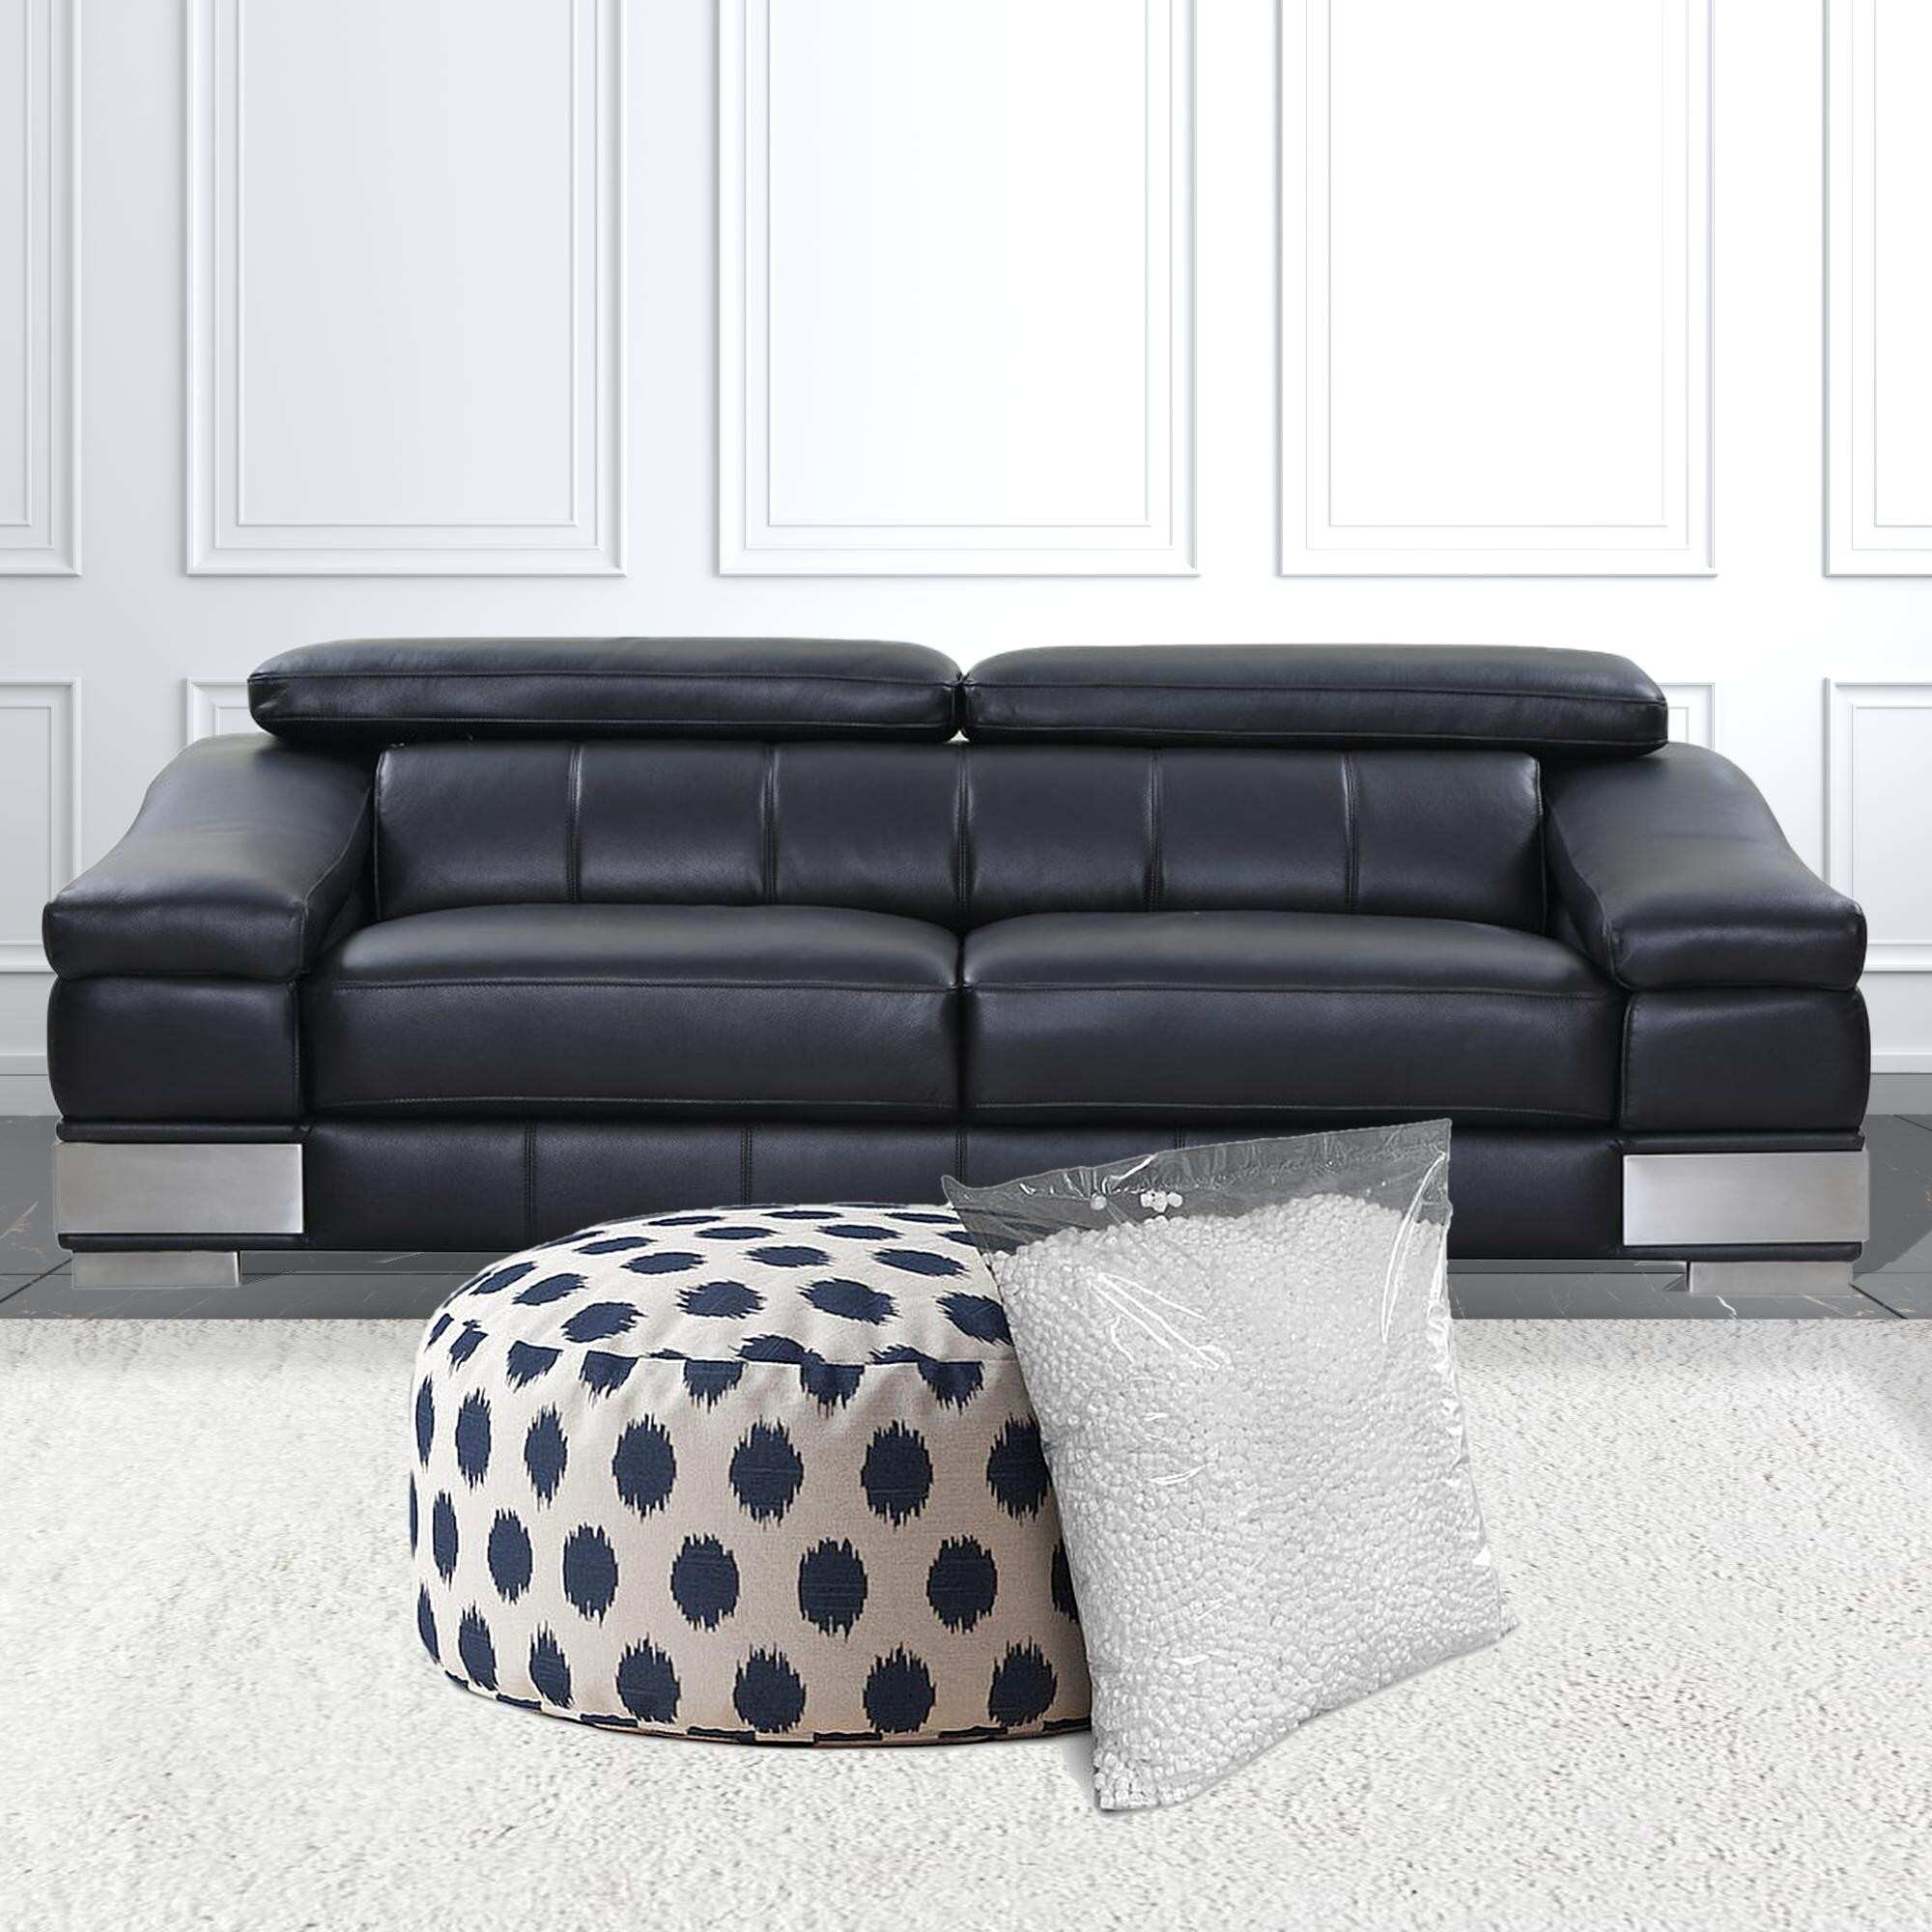 HomeRoots 24" White And Blue Canvas Round Polka Dots Pouf Ottoman